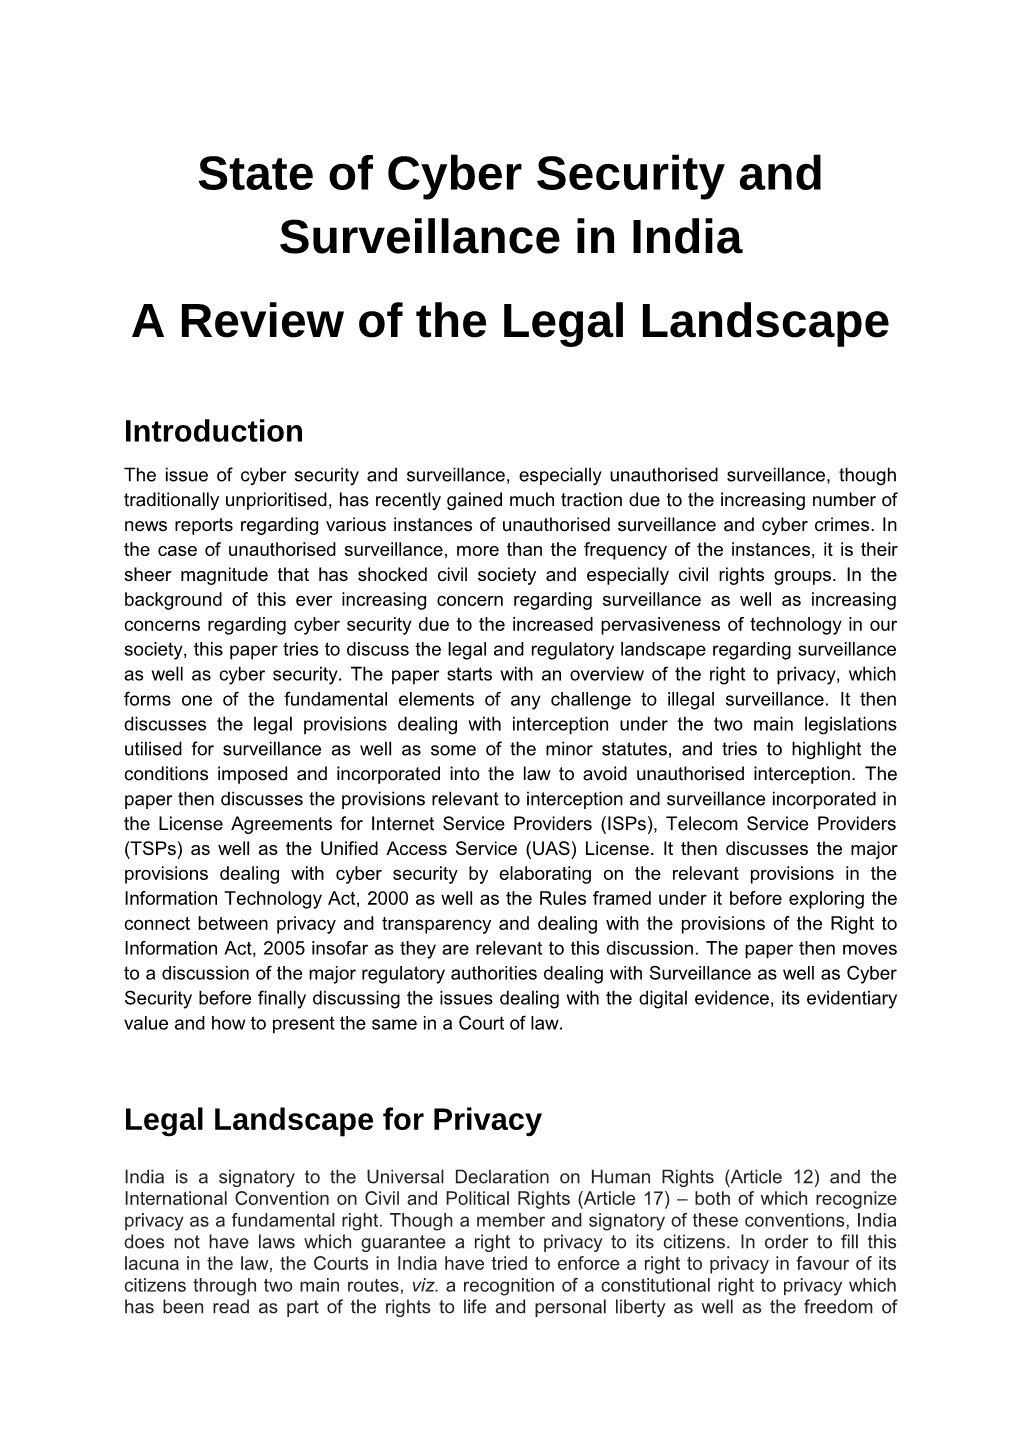 State of Cyber Security and Surveillance in India a Review of the Legal Landscape